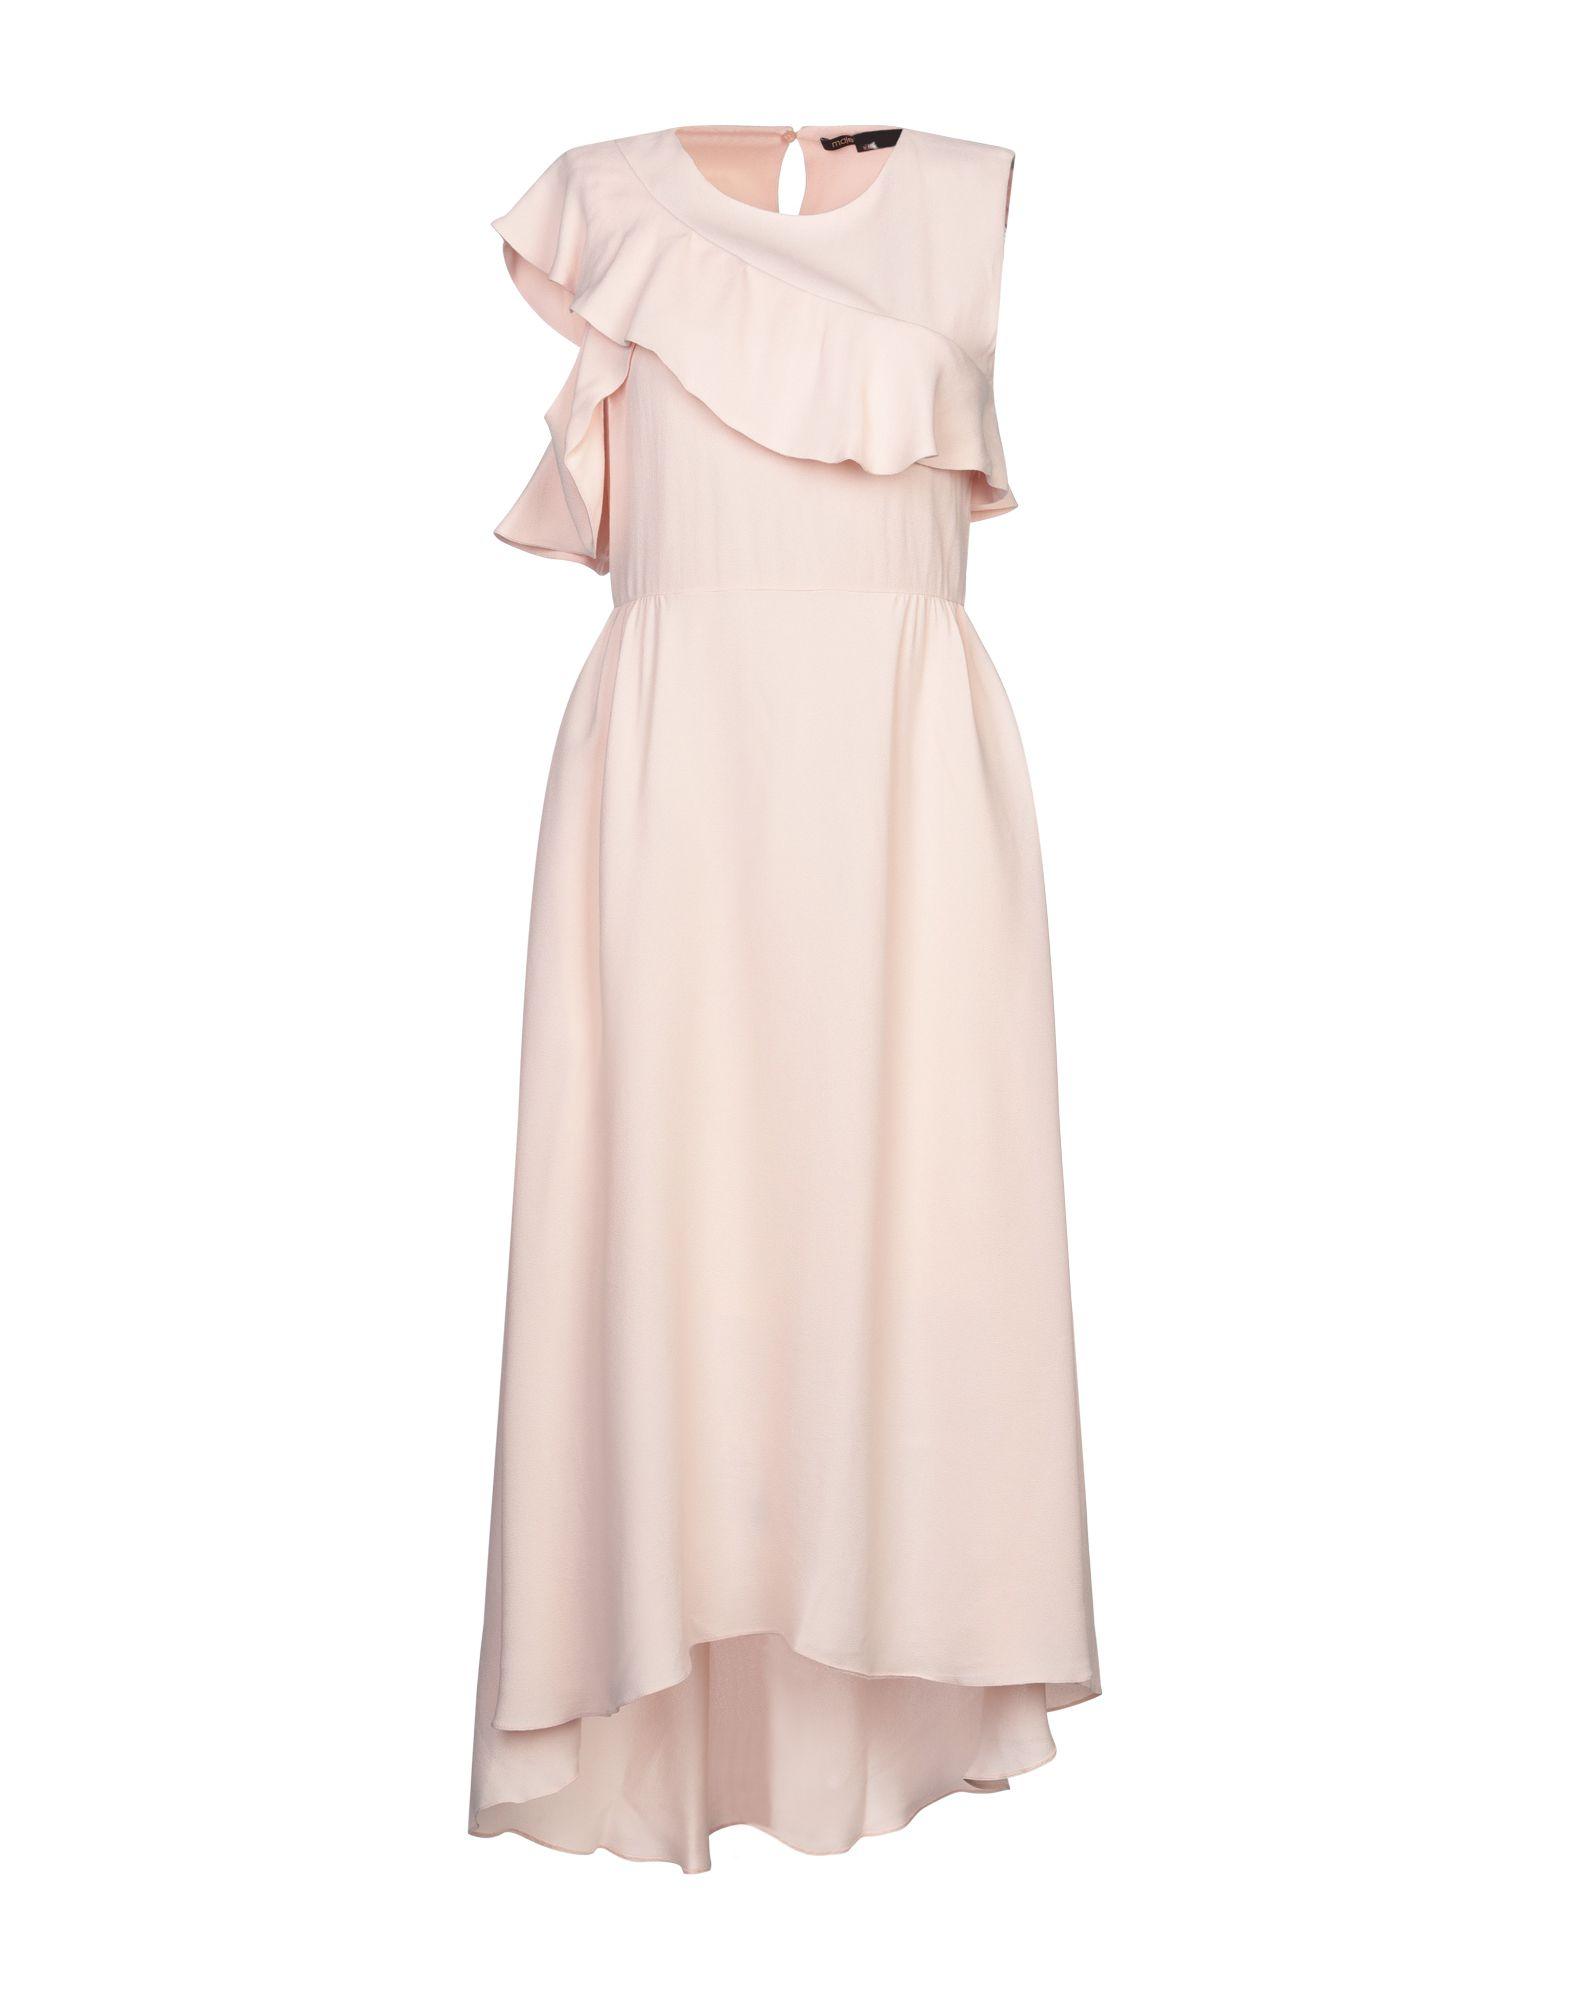 Maje Synthetic 3/4 Length Dress in Light Pink (Pink) - Lyst